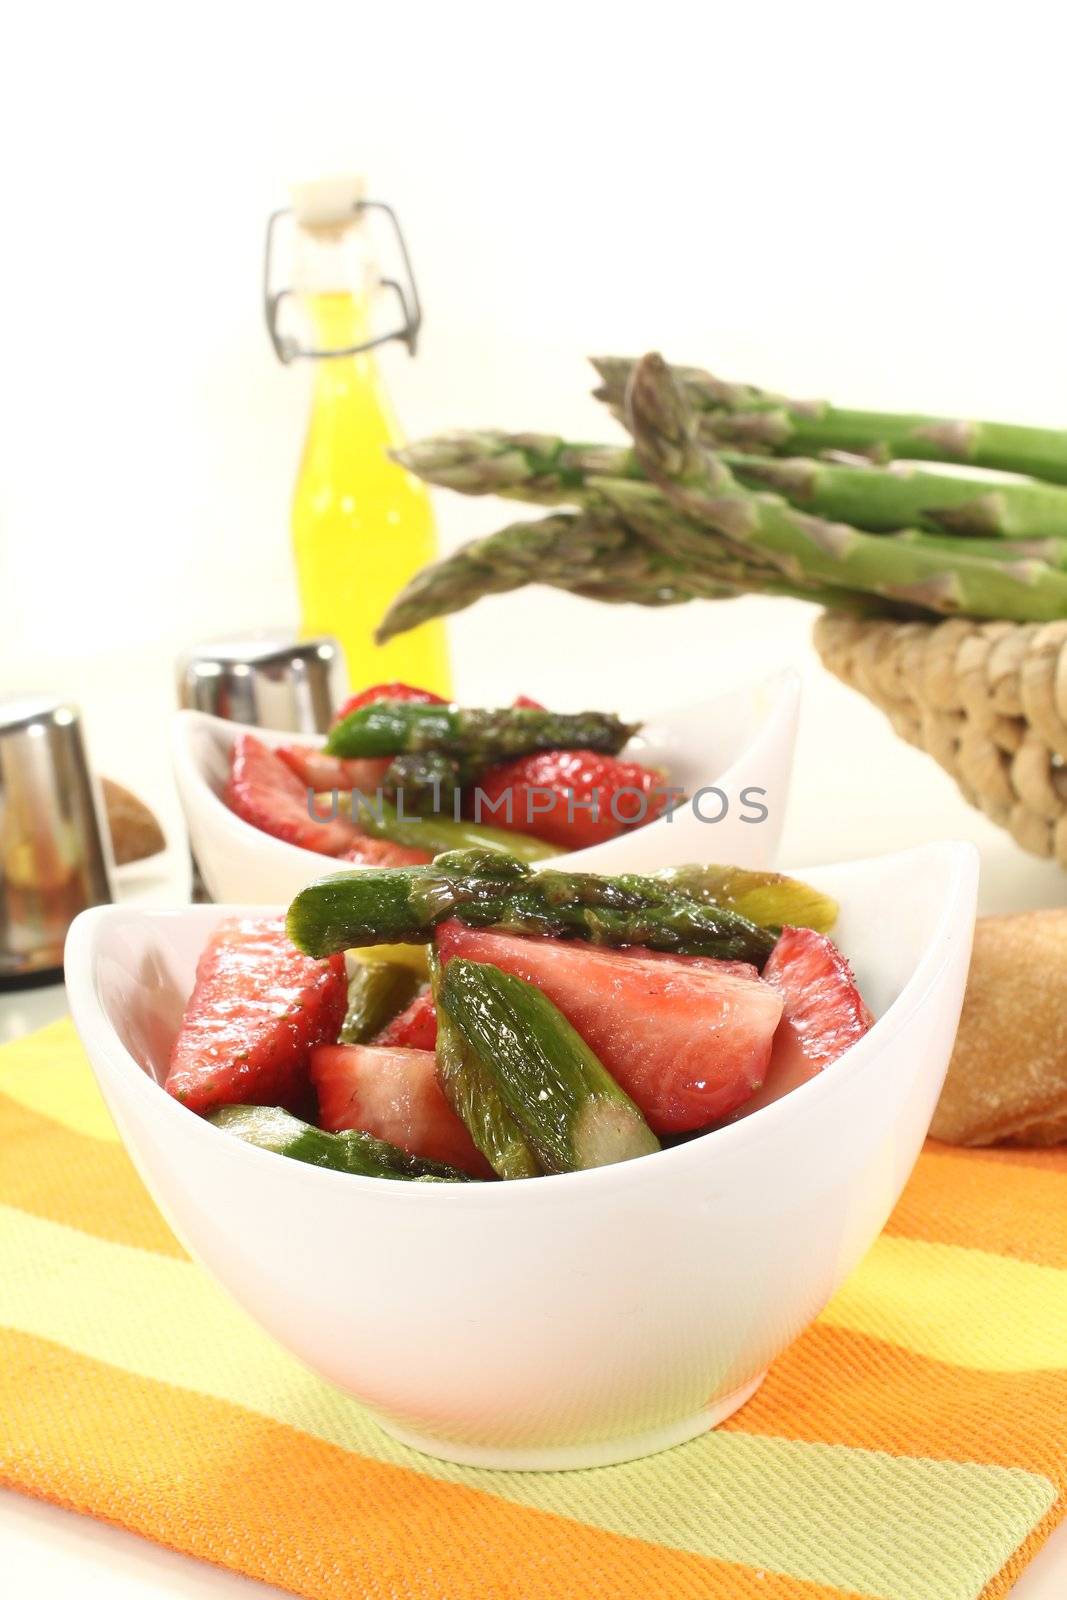 Asparagus salad with fresh strawberries and oil on a light background